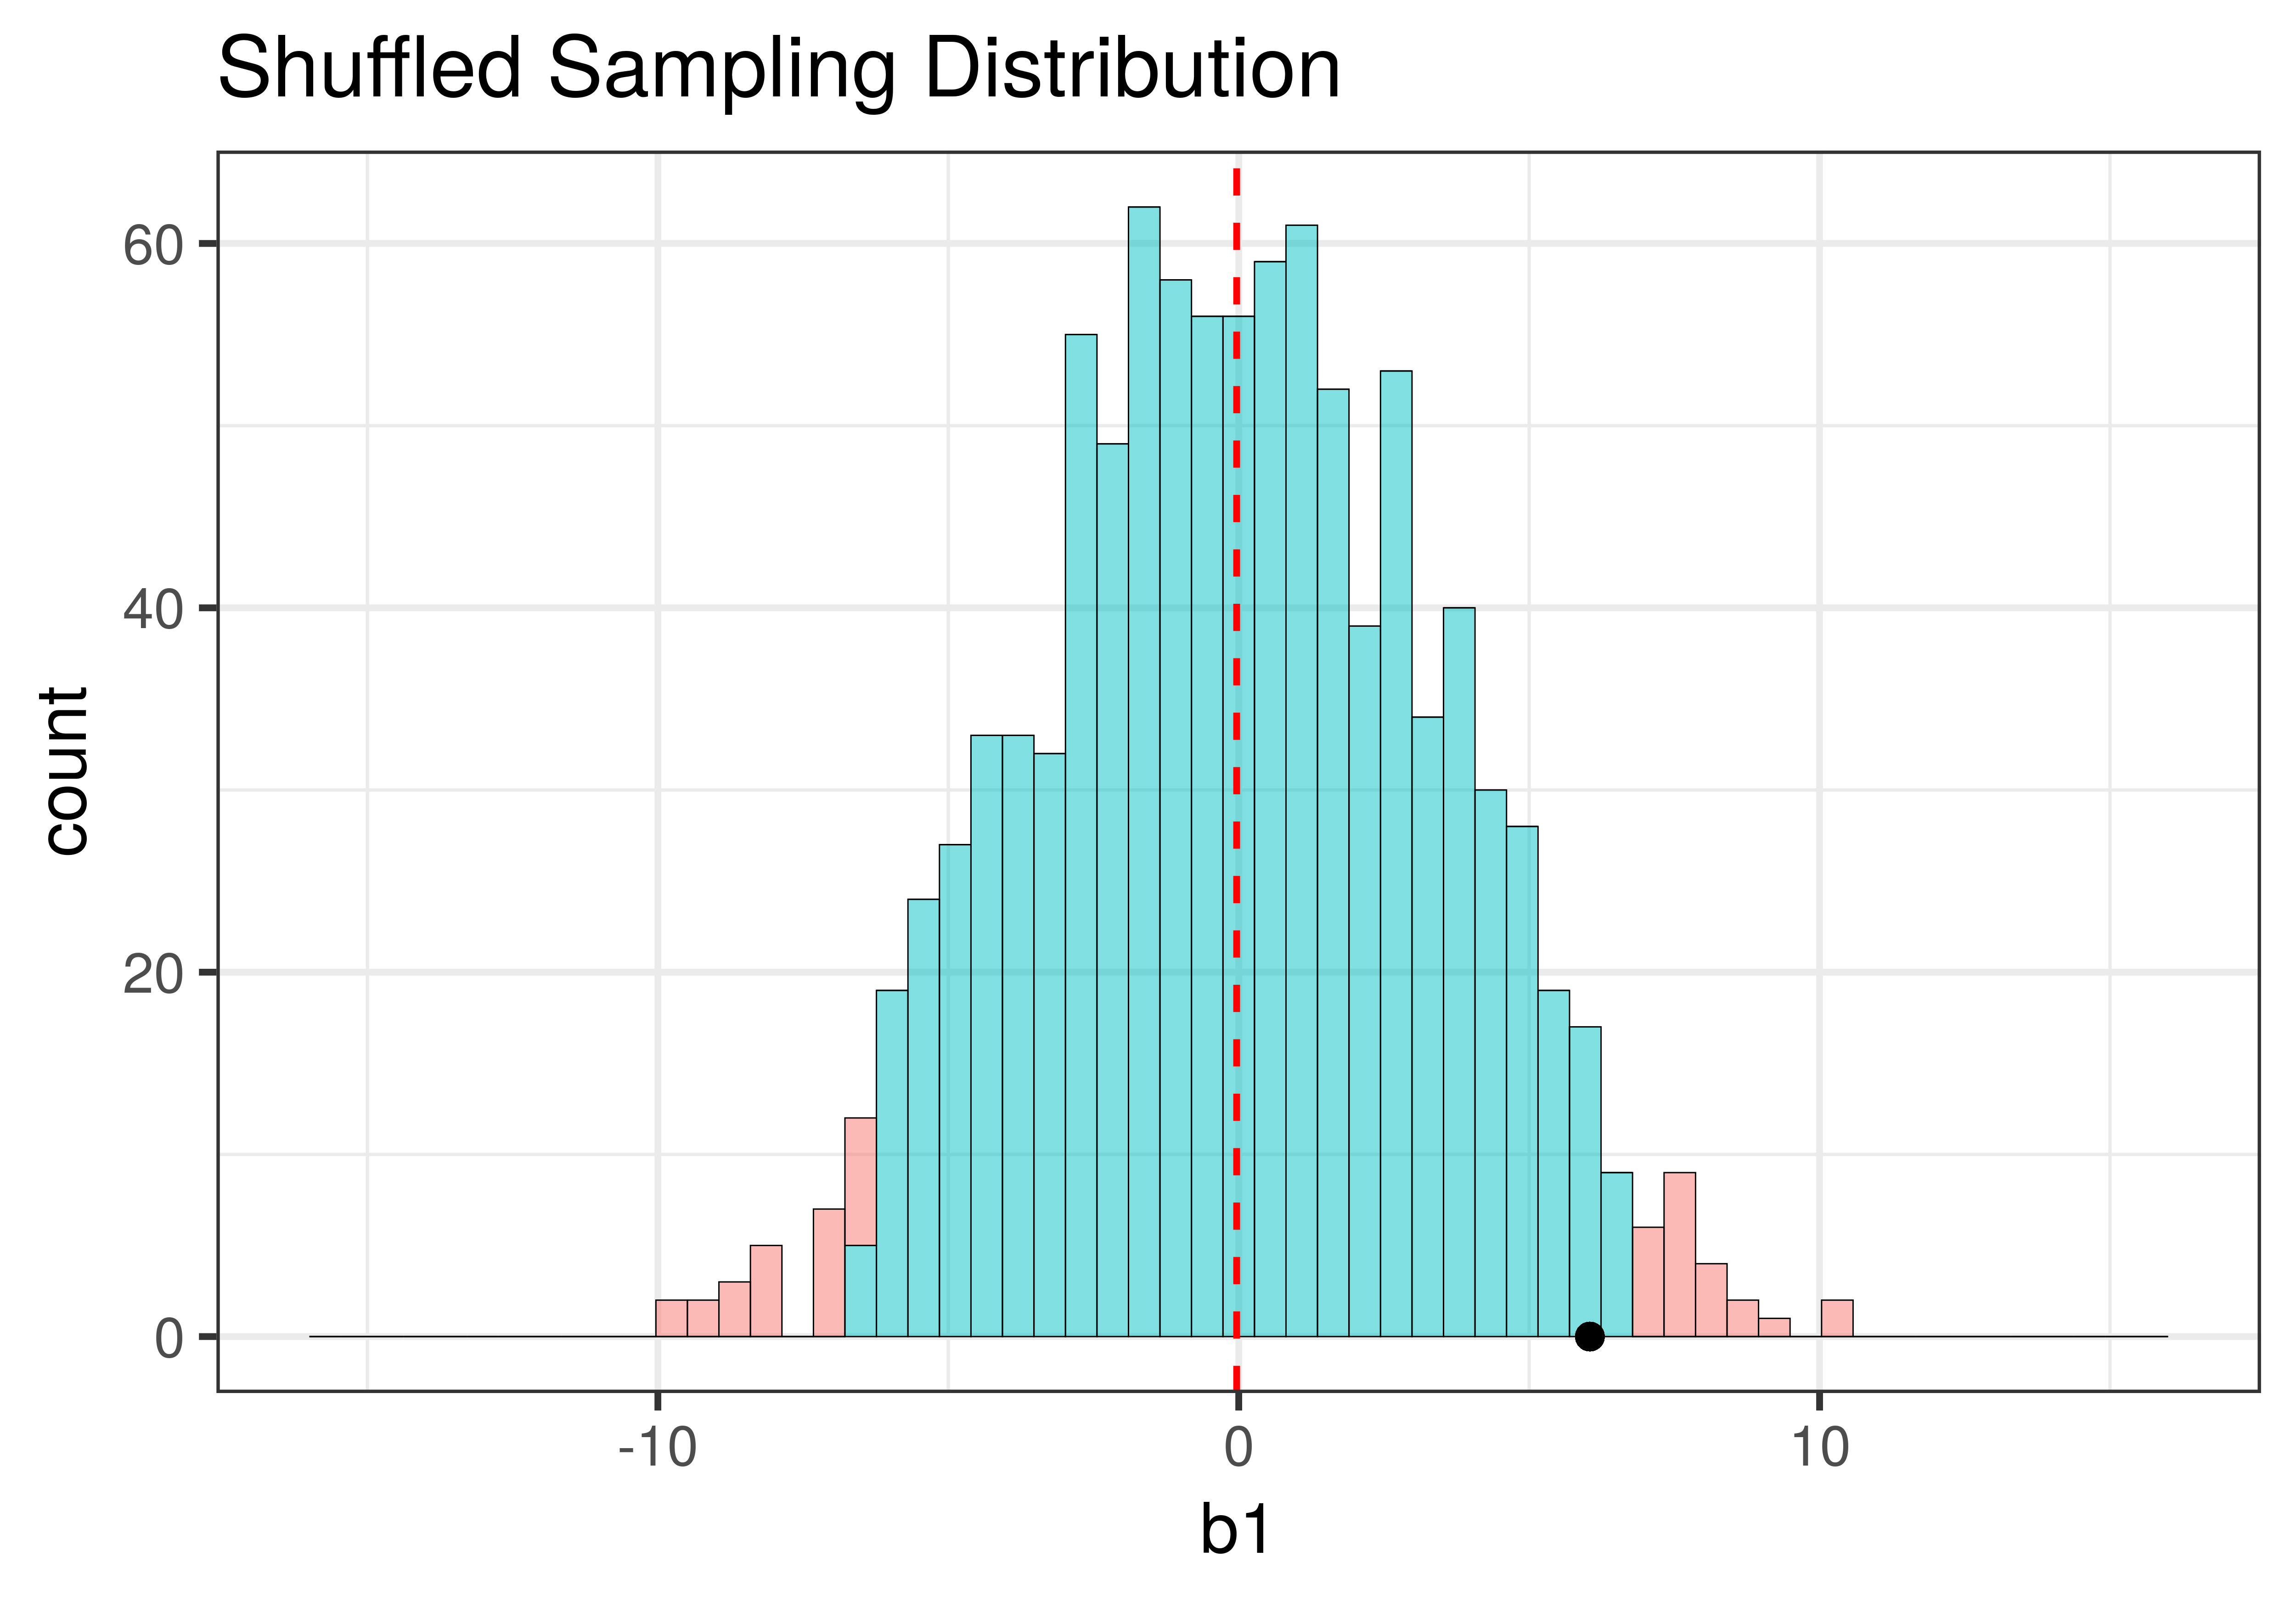 On the left, a histogram of a shuffled sampling distribution of b1. It is centered at zero and the sample b1 of 6.05 falls near the upper tail of the distribution, but is still within the middle 95 percent of samples. The lowest b1s are near about negative 10, and the highest b1s are near about 10.